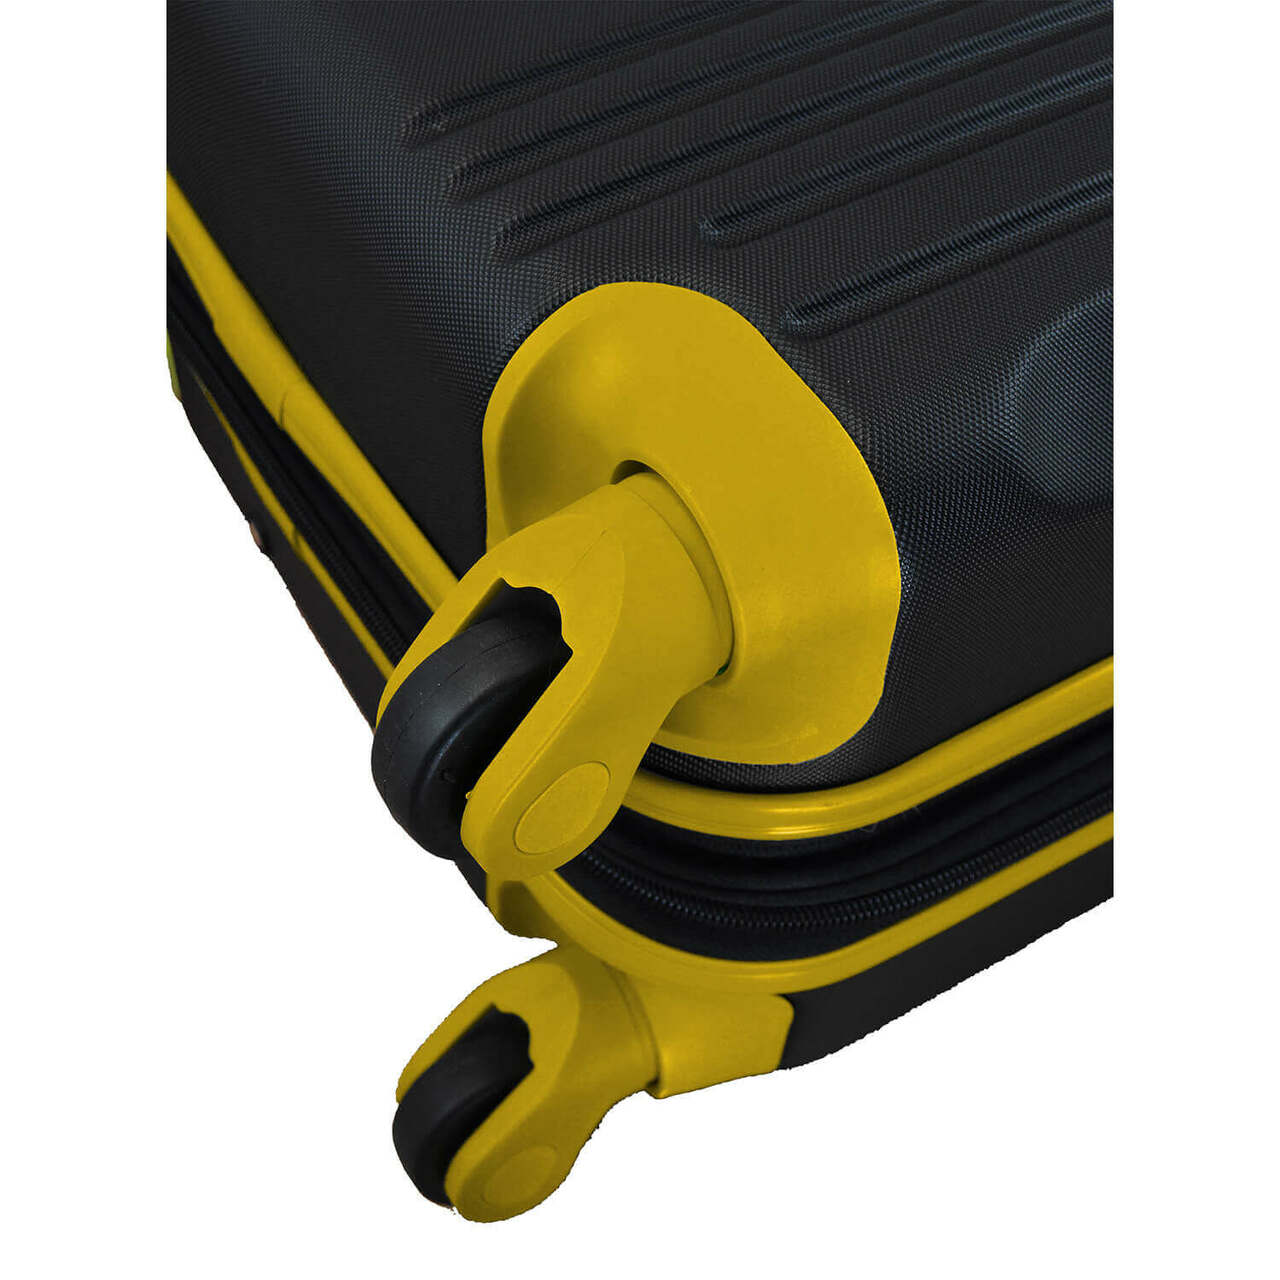 Predators Carry On Spinner Luggage | Nashville Predators Hardcase Two-Tone Luggage Carry-on Spinner in Yellow